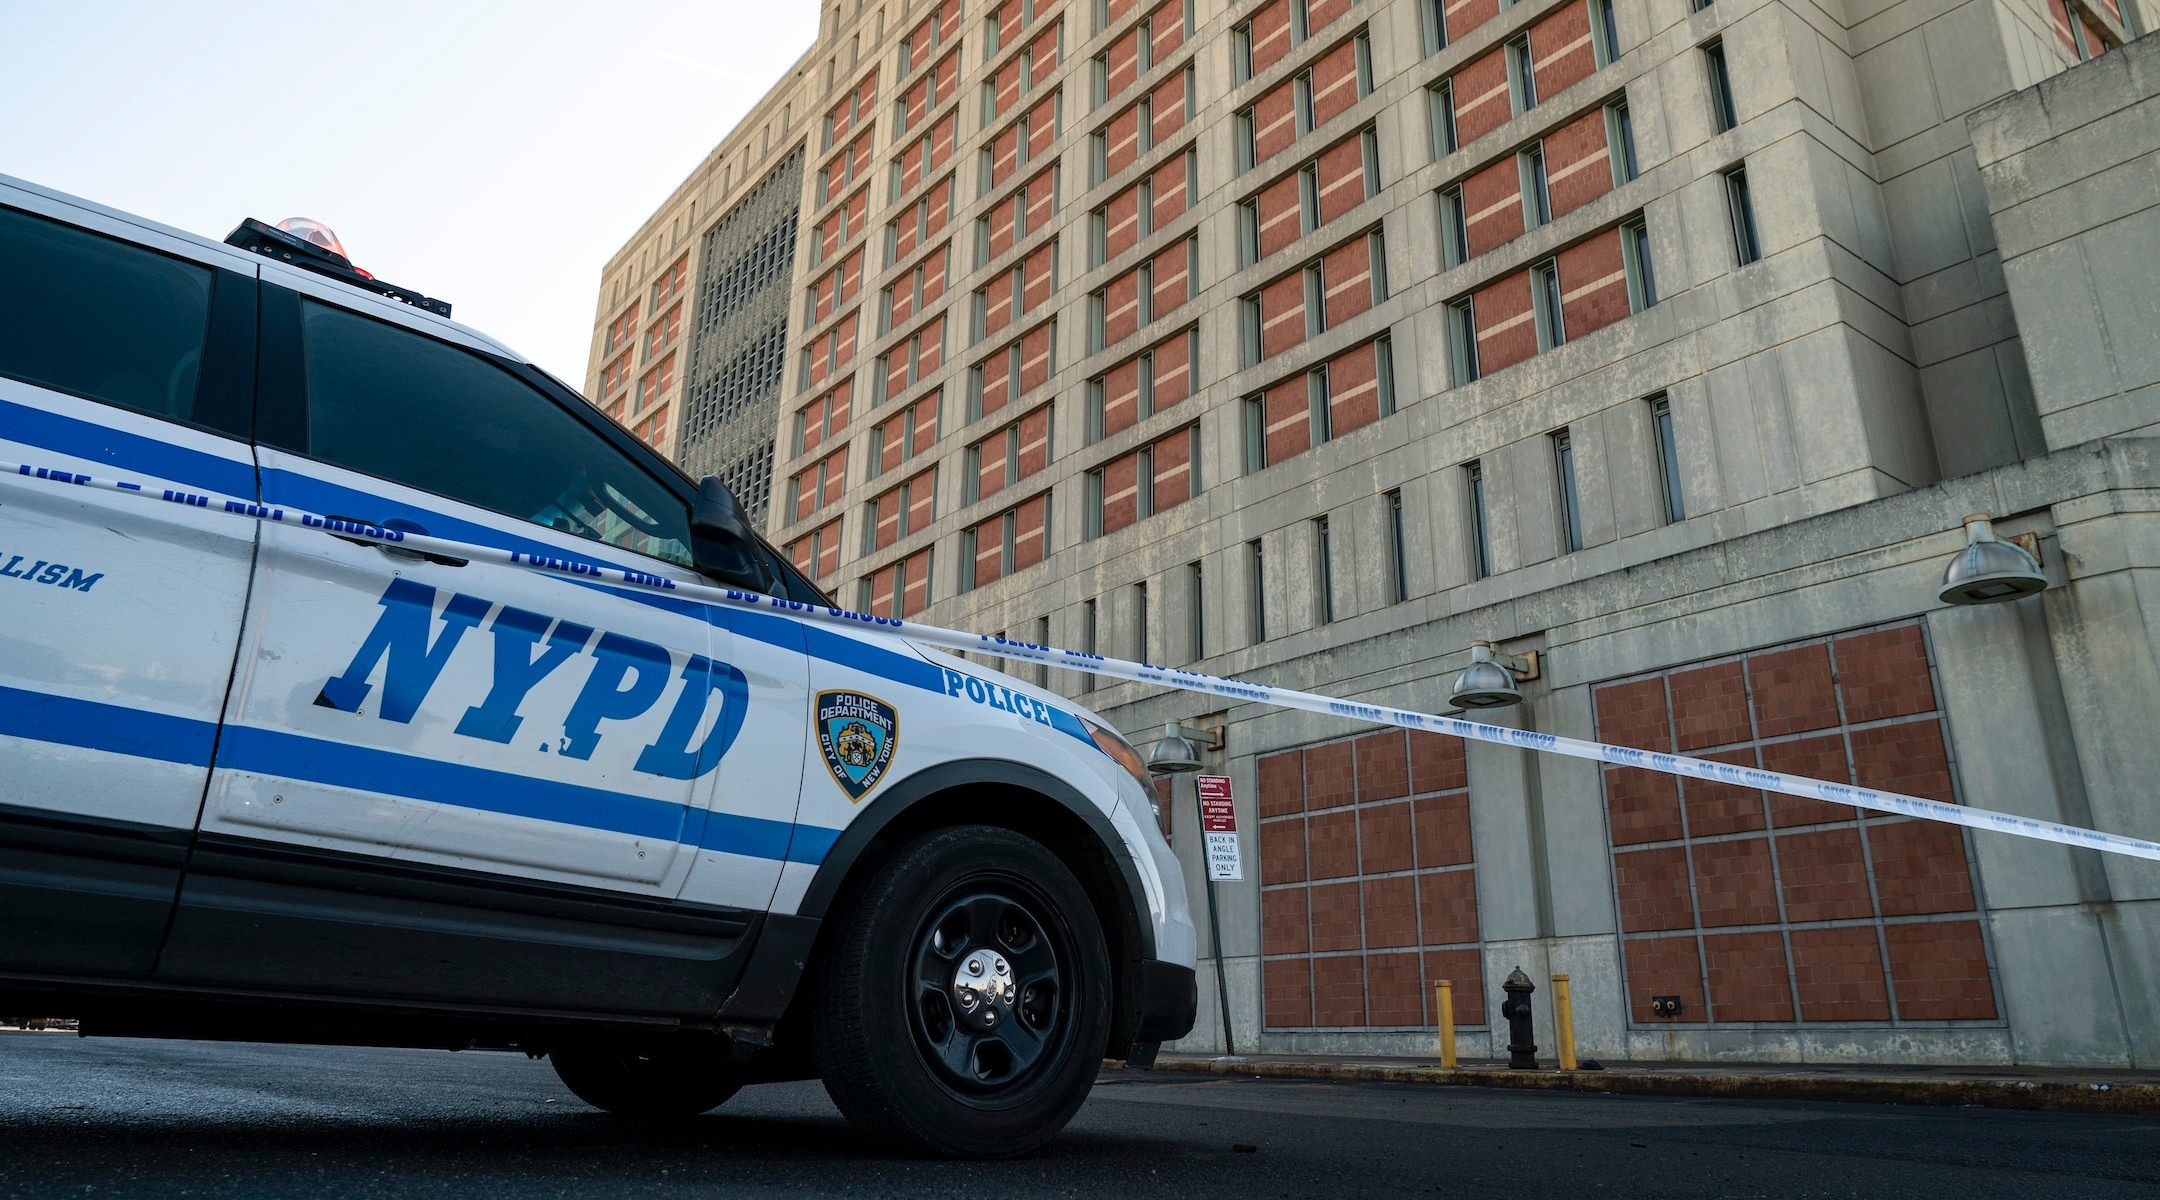 An NYPD vehicles sits outside the Metropolitan Detention Center in Brooklyn on February 4, 2019. (Drew Angerer/Getty Images)